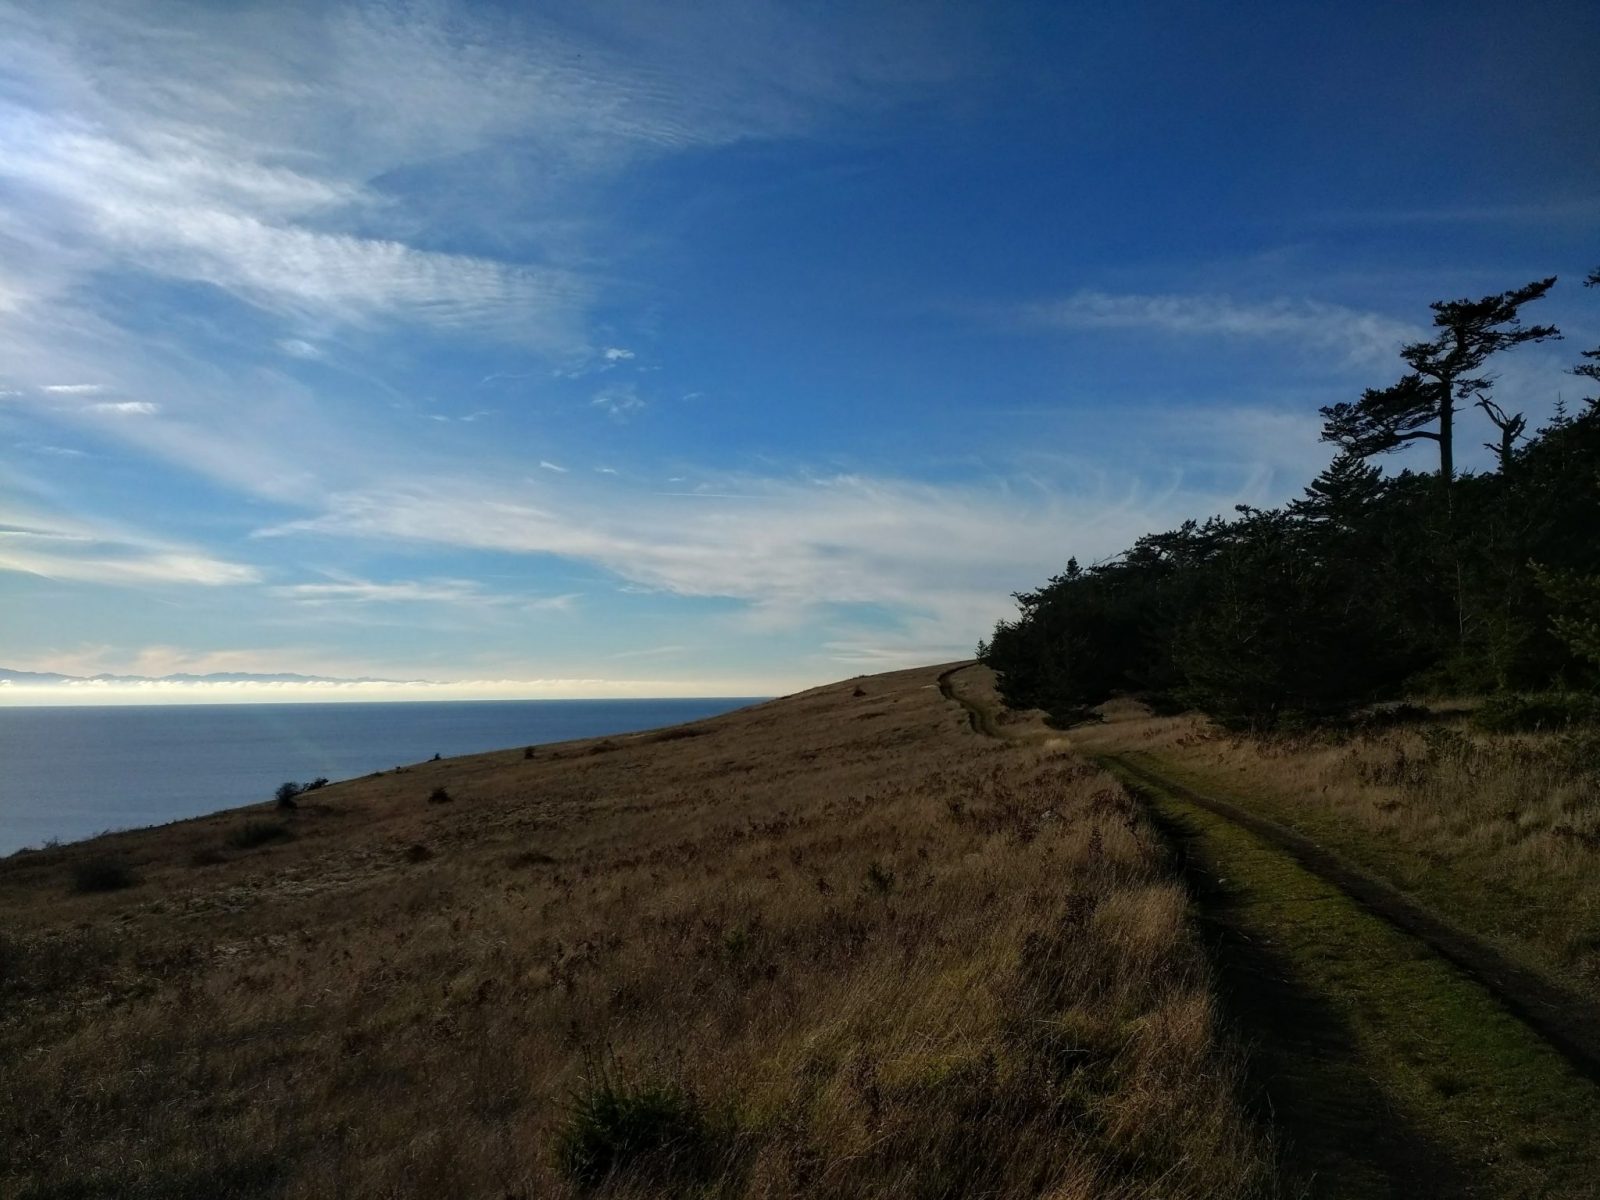 An excellent spring hike near Seattle, the Mt Finlayson trail on San Juan Island. The trail is wide, like an abandoned road, and crosses a grassy field between a forest and the water below.